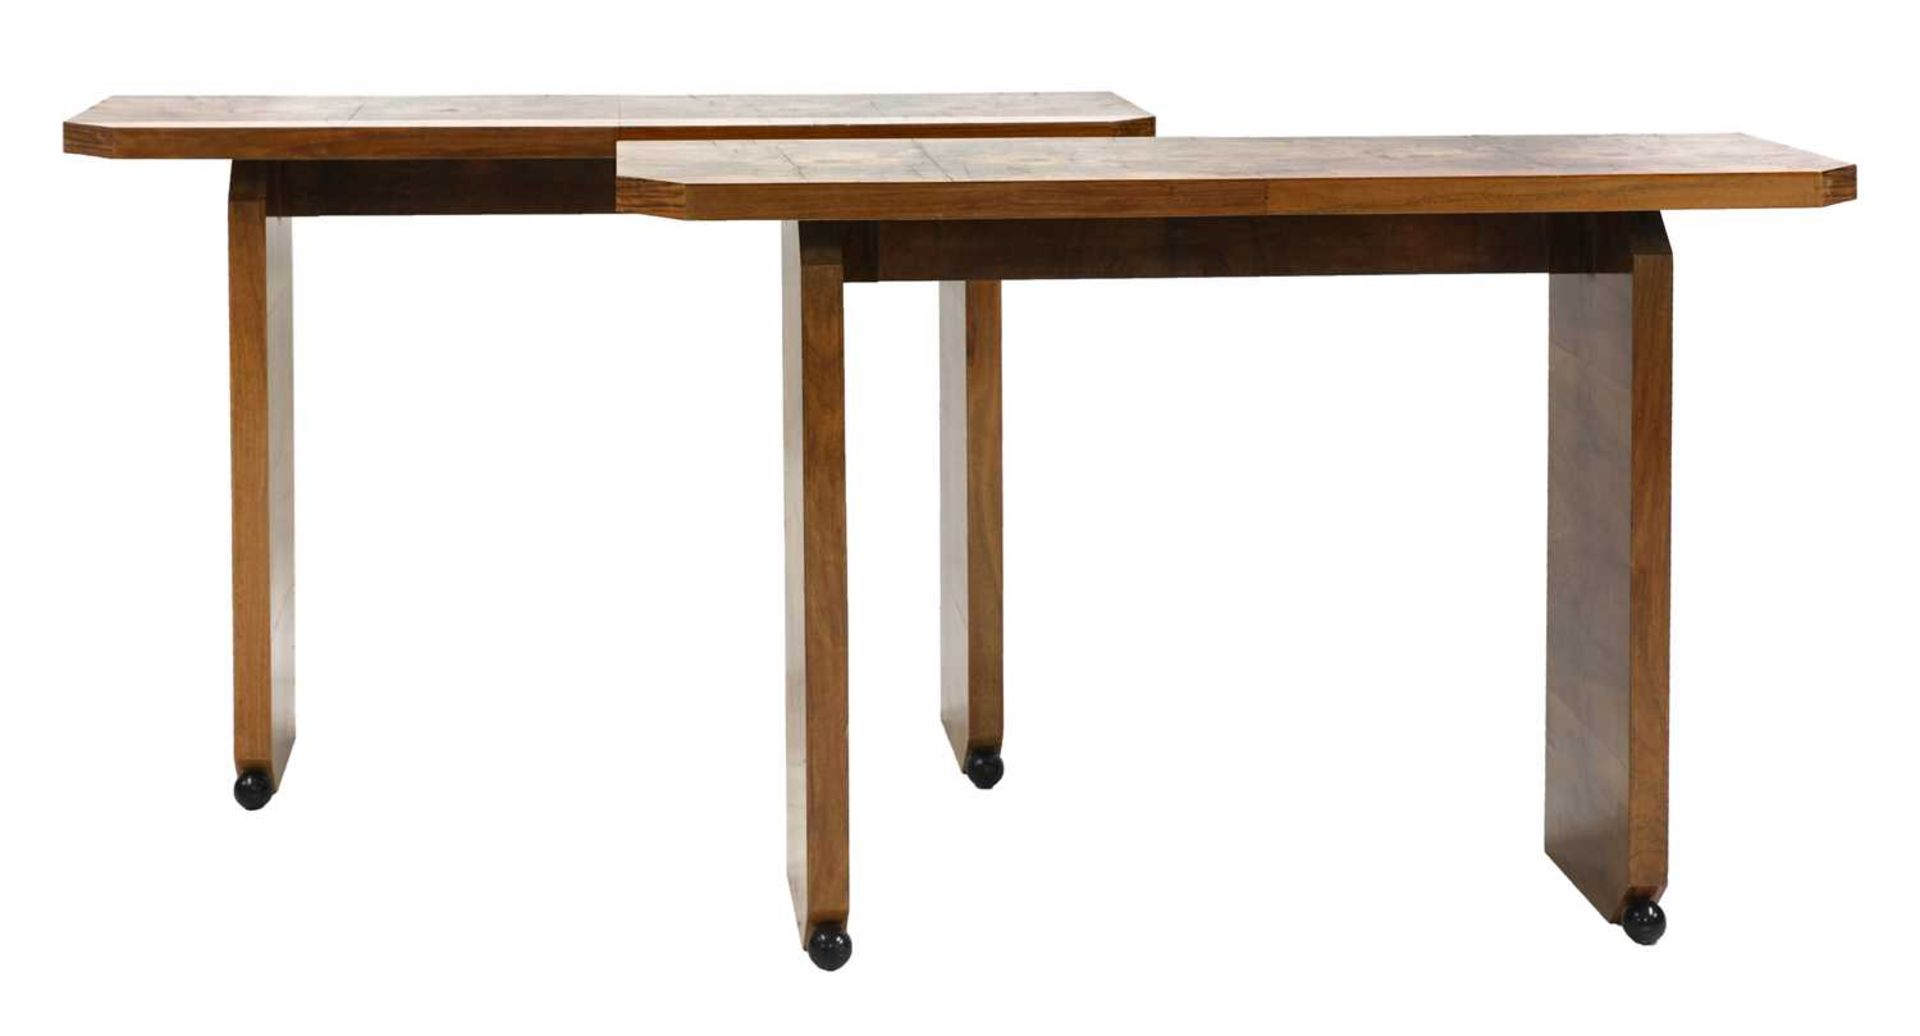 A pair of Art Deco burr walnut-style console tables, - Image 2 of 4